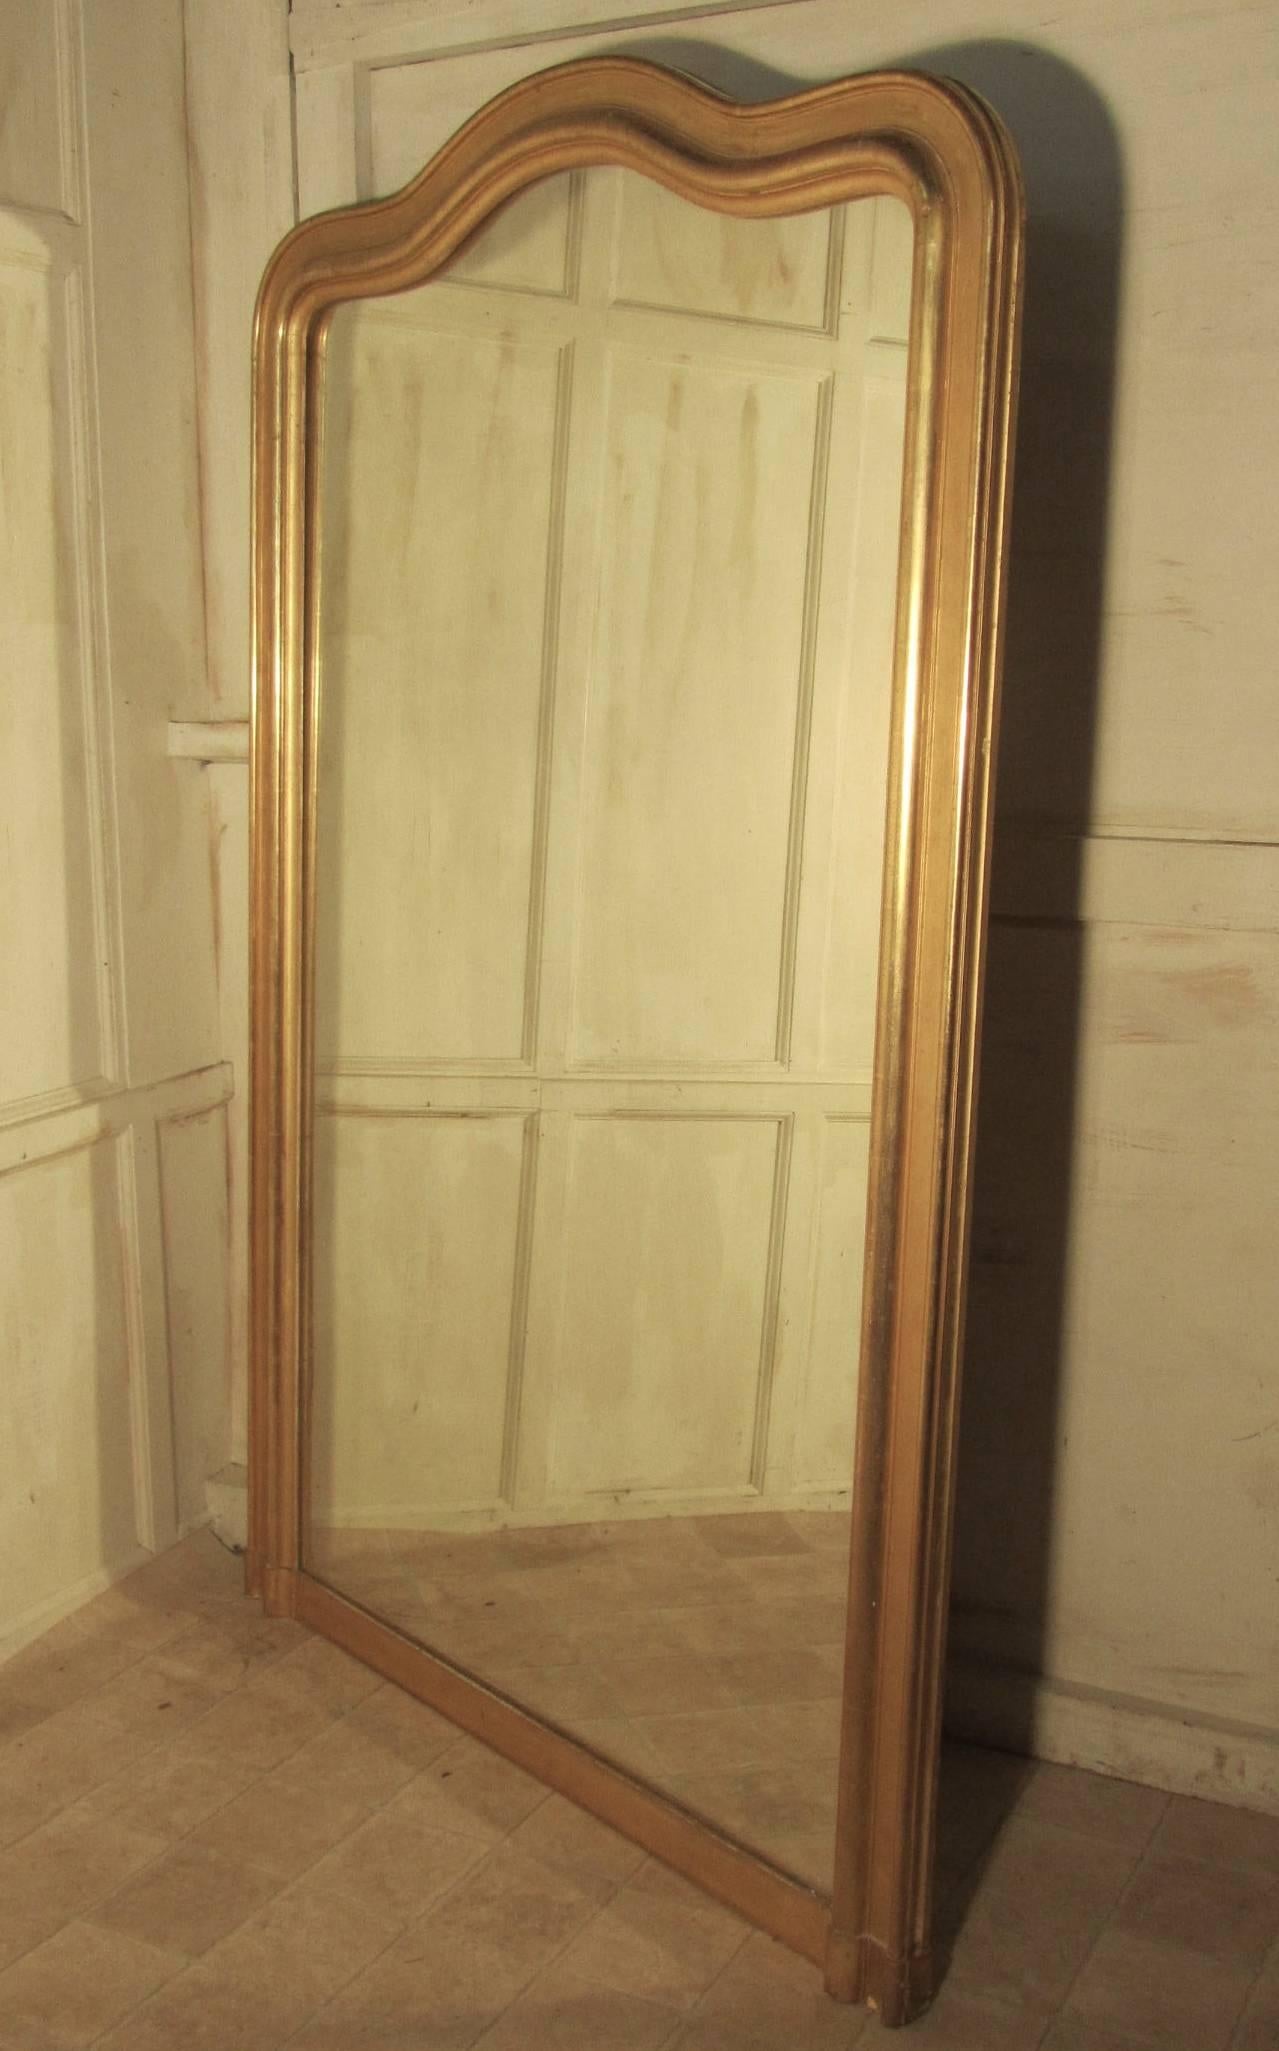 This is a very large statement piece and genuine 19th century French chic furnishing, the 4” frame which has a serpentine arch at the top has a charming slightly faded pale gold finish, it is sound and very heavy, the looking glass is original and